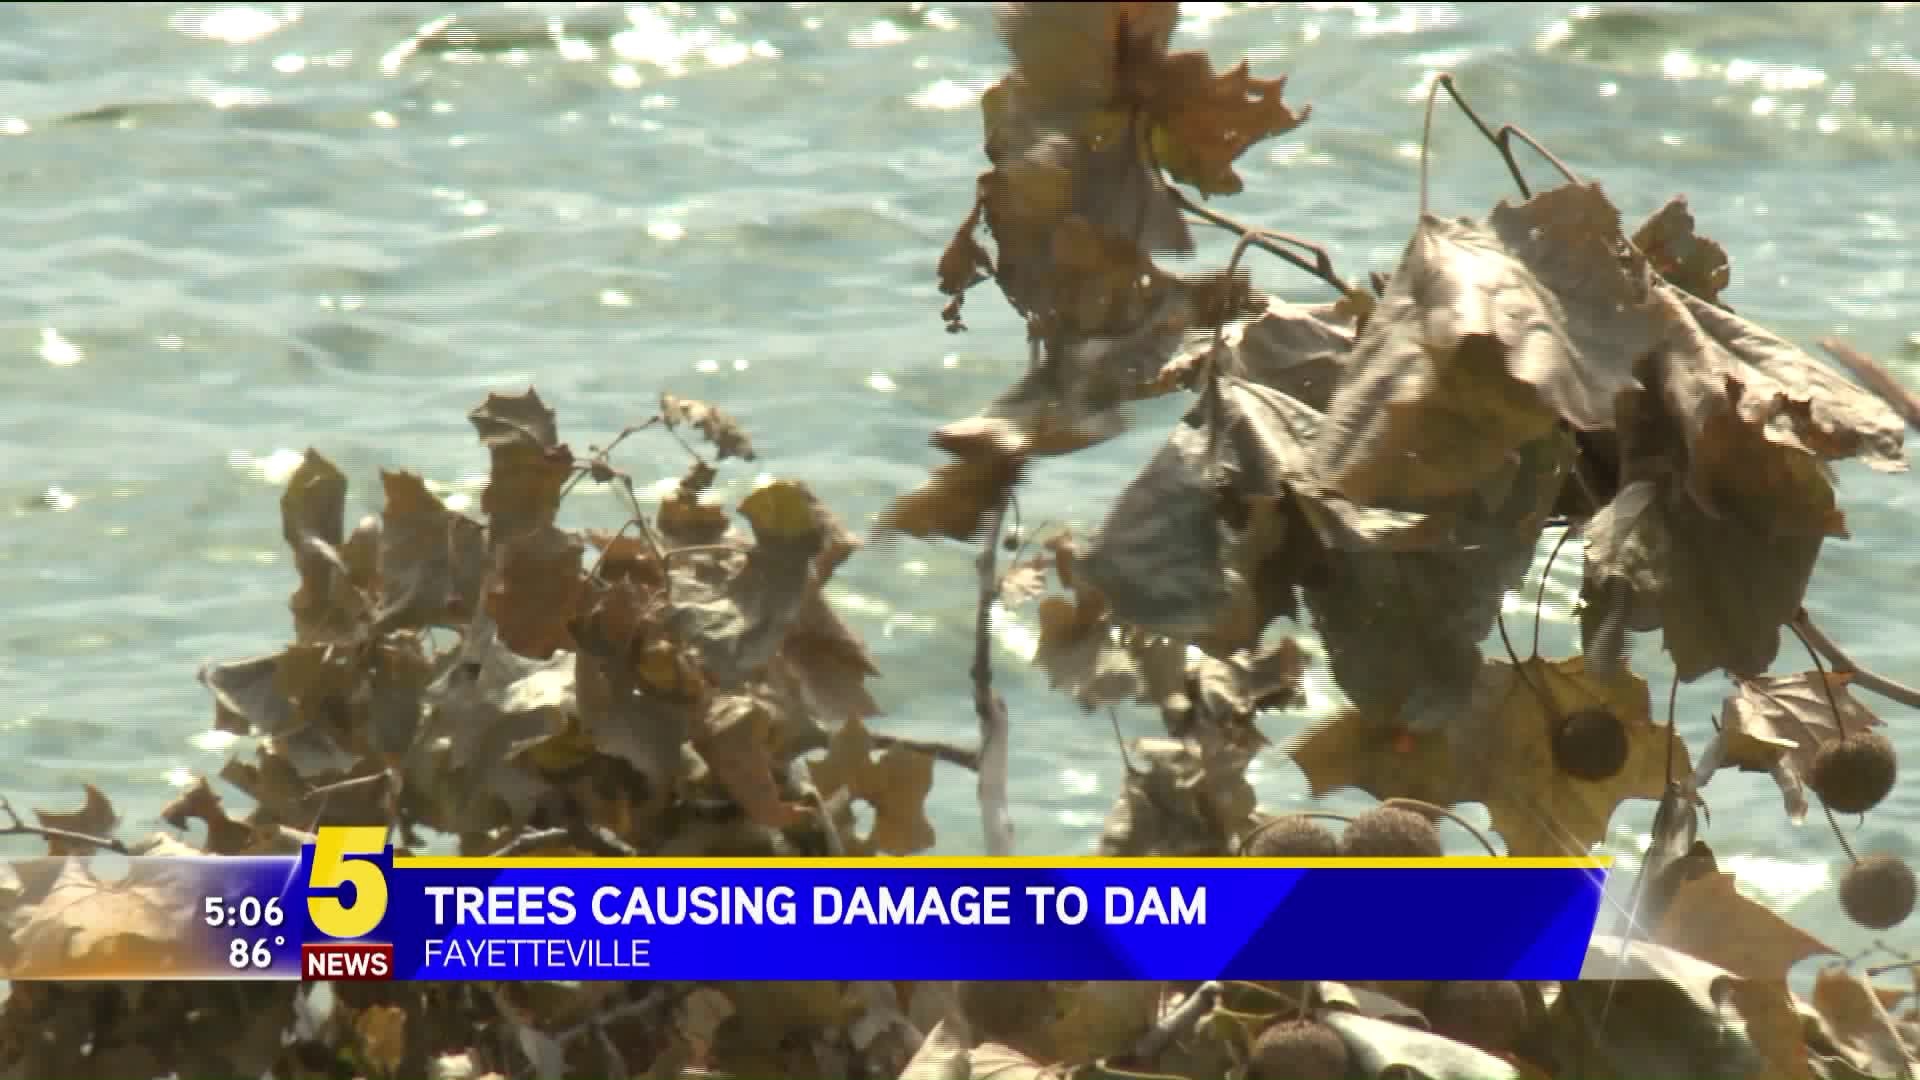 TREE REMOVAL AT LAKE FAYETTEVILLE